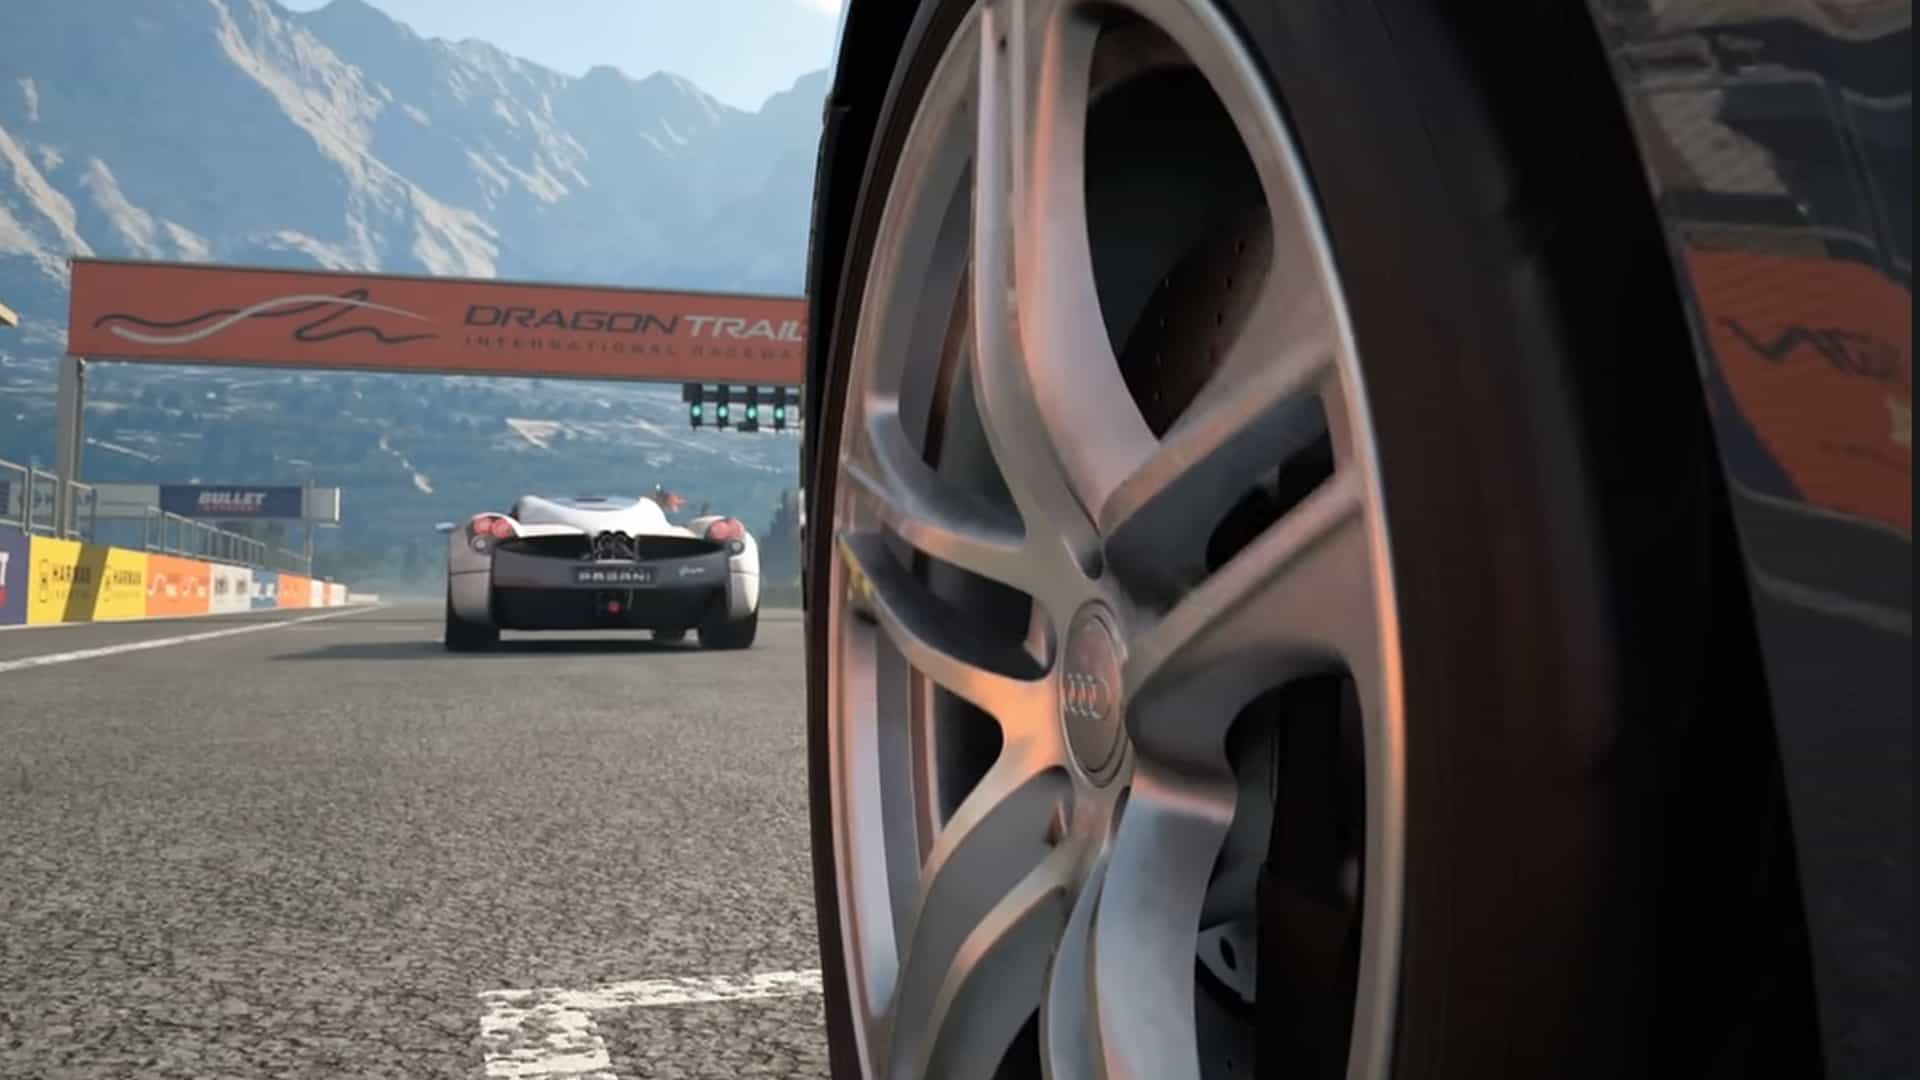 Gran Turismo 7 State Of Play Coming This Week, 30 Minutes Of PS5